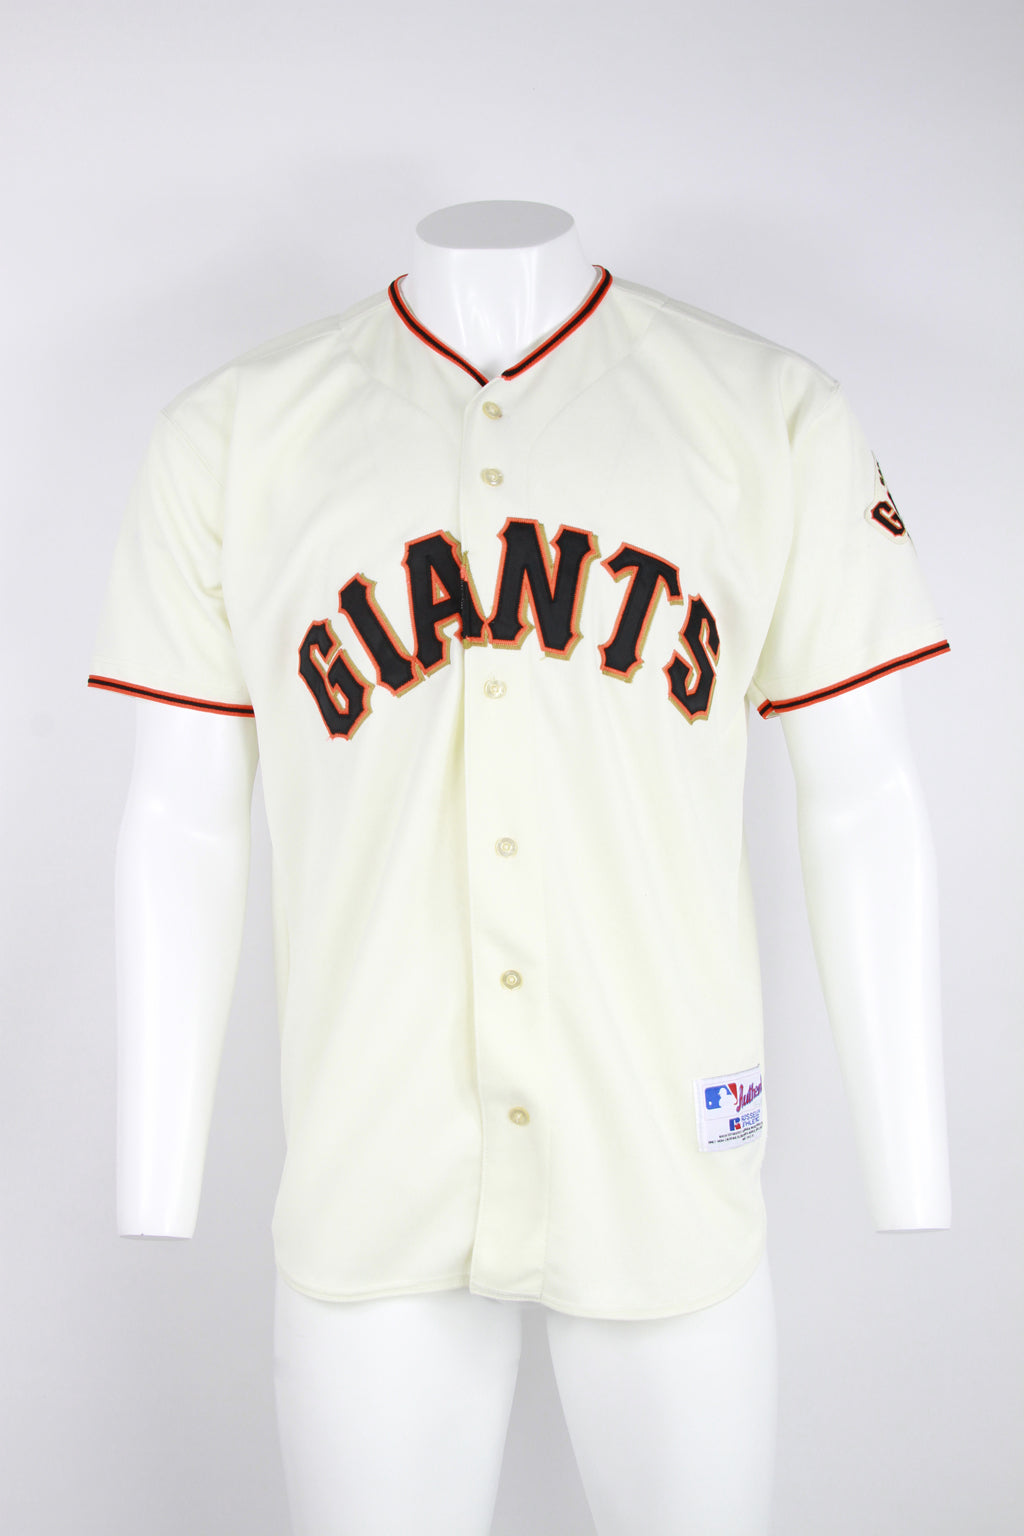 Vintage SF Giants #25 Russell athletic Authentic collection Baseball Jersey  - L